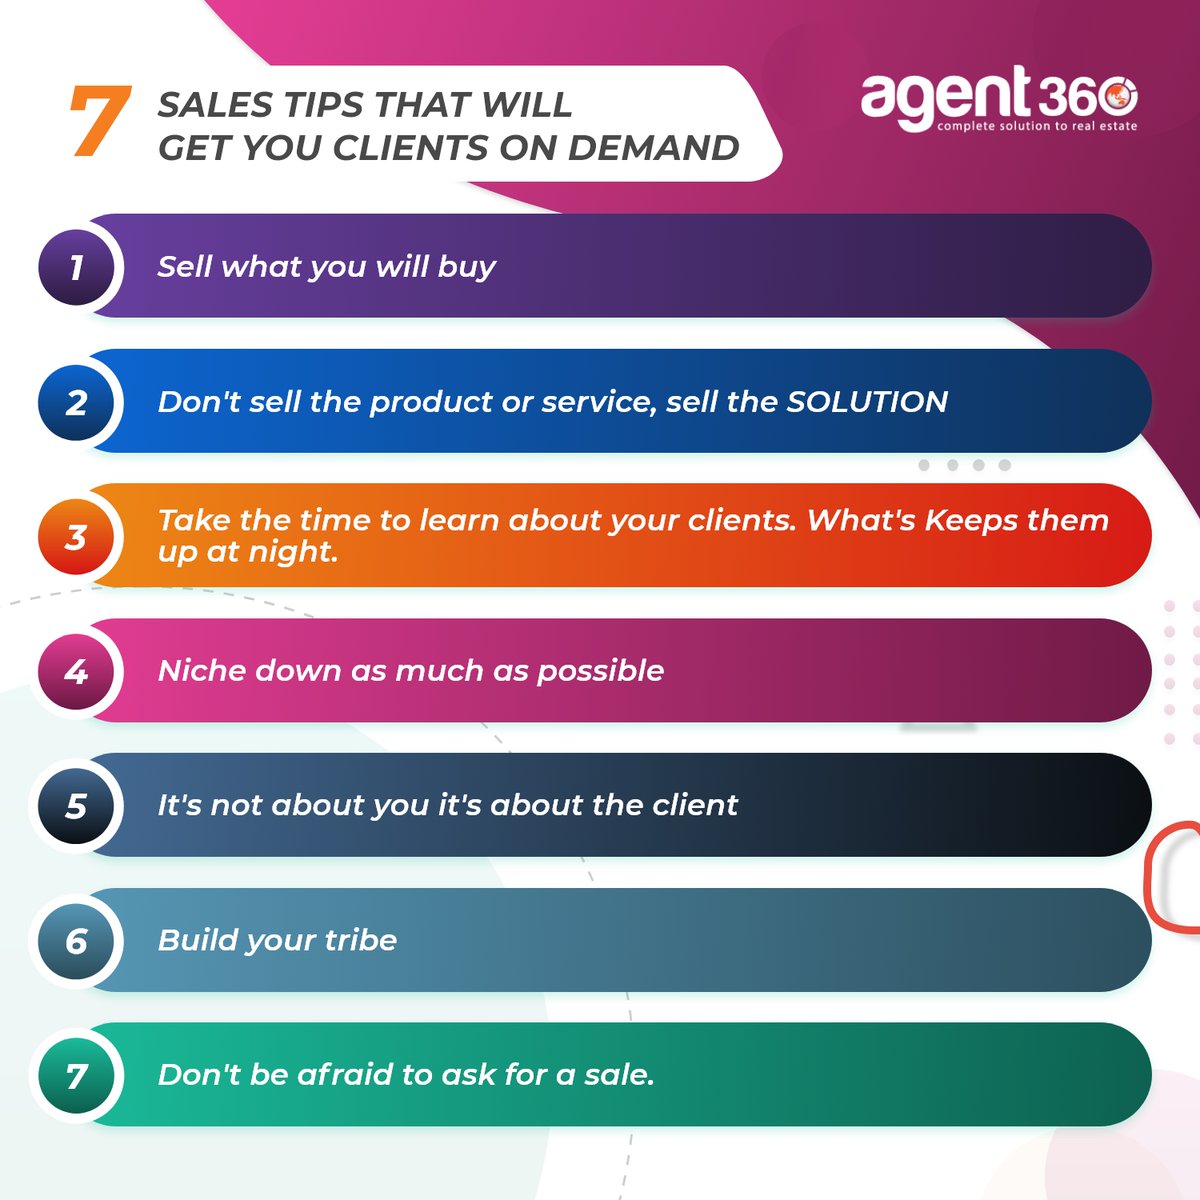 Struggling with sales in your business? These tips are for service based businesses and direct sellers. 7 Sales tips that will get you clients on demand. 
.
.
.
#sales #clientattraction #onlinemarketing #marketing #salestips #businesstips #business #agent360